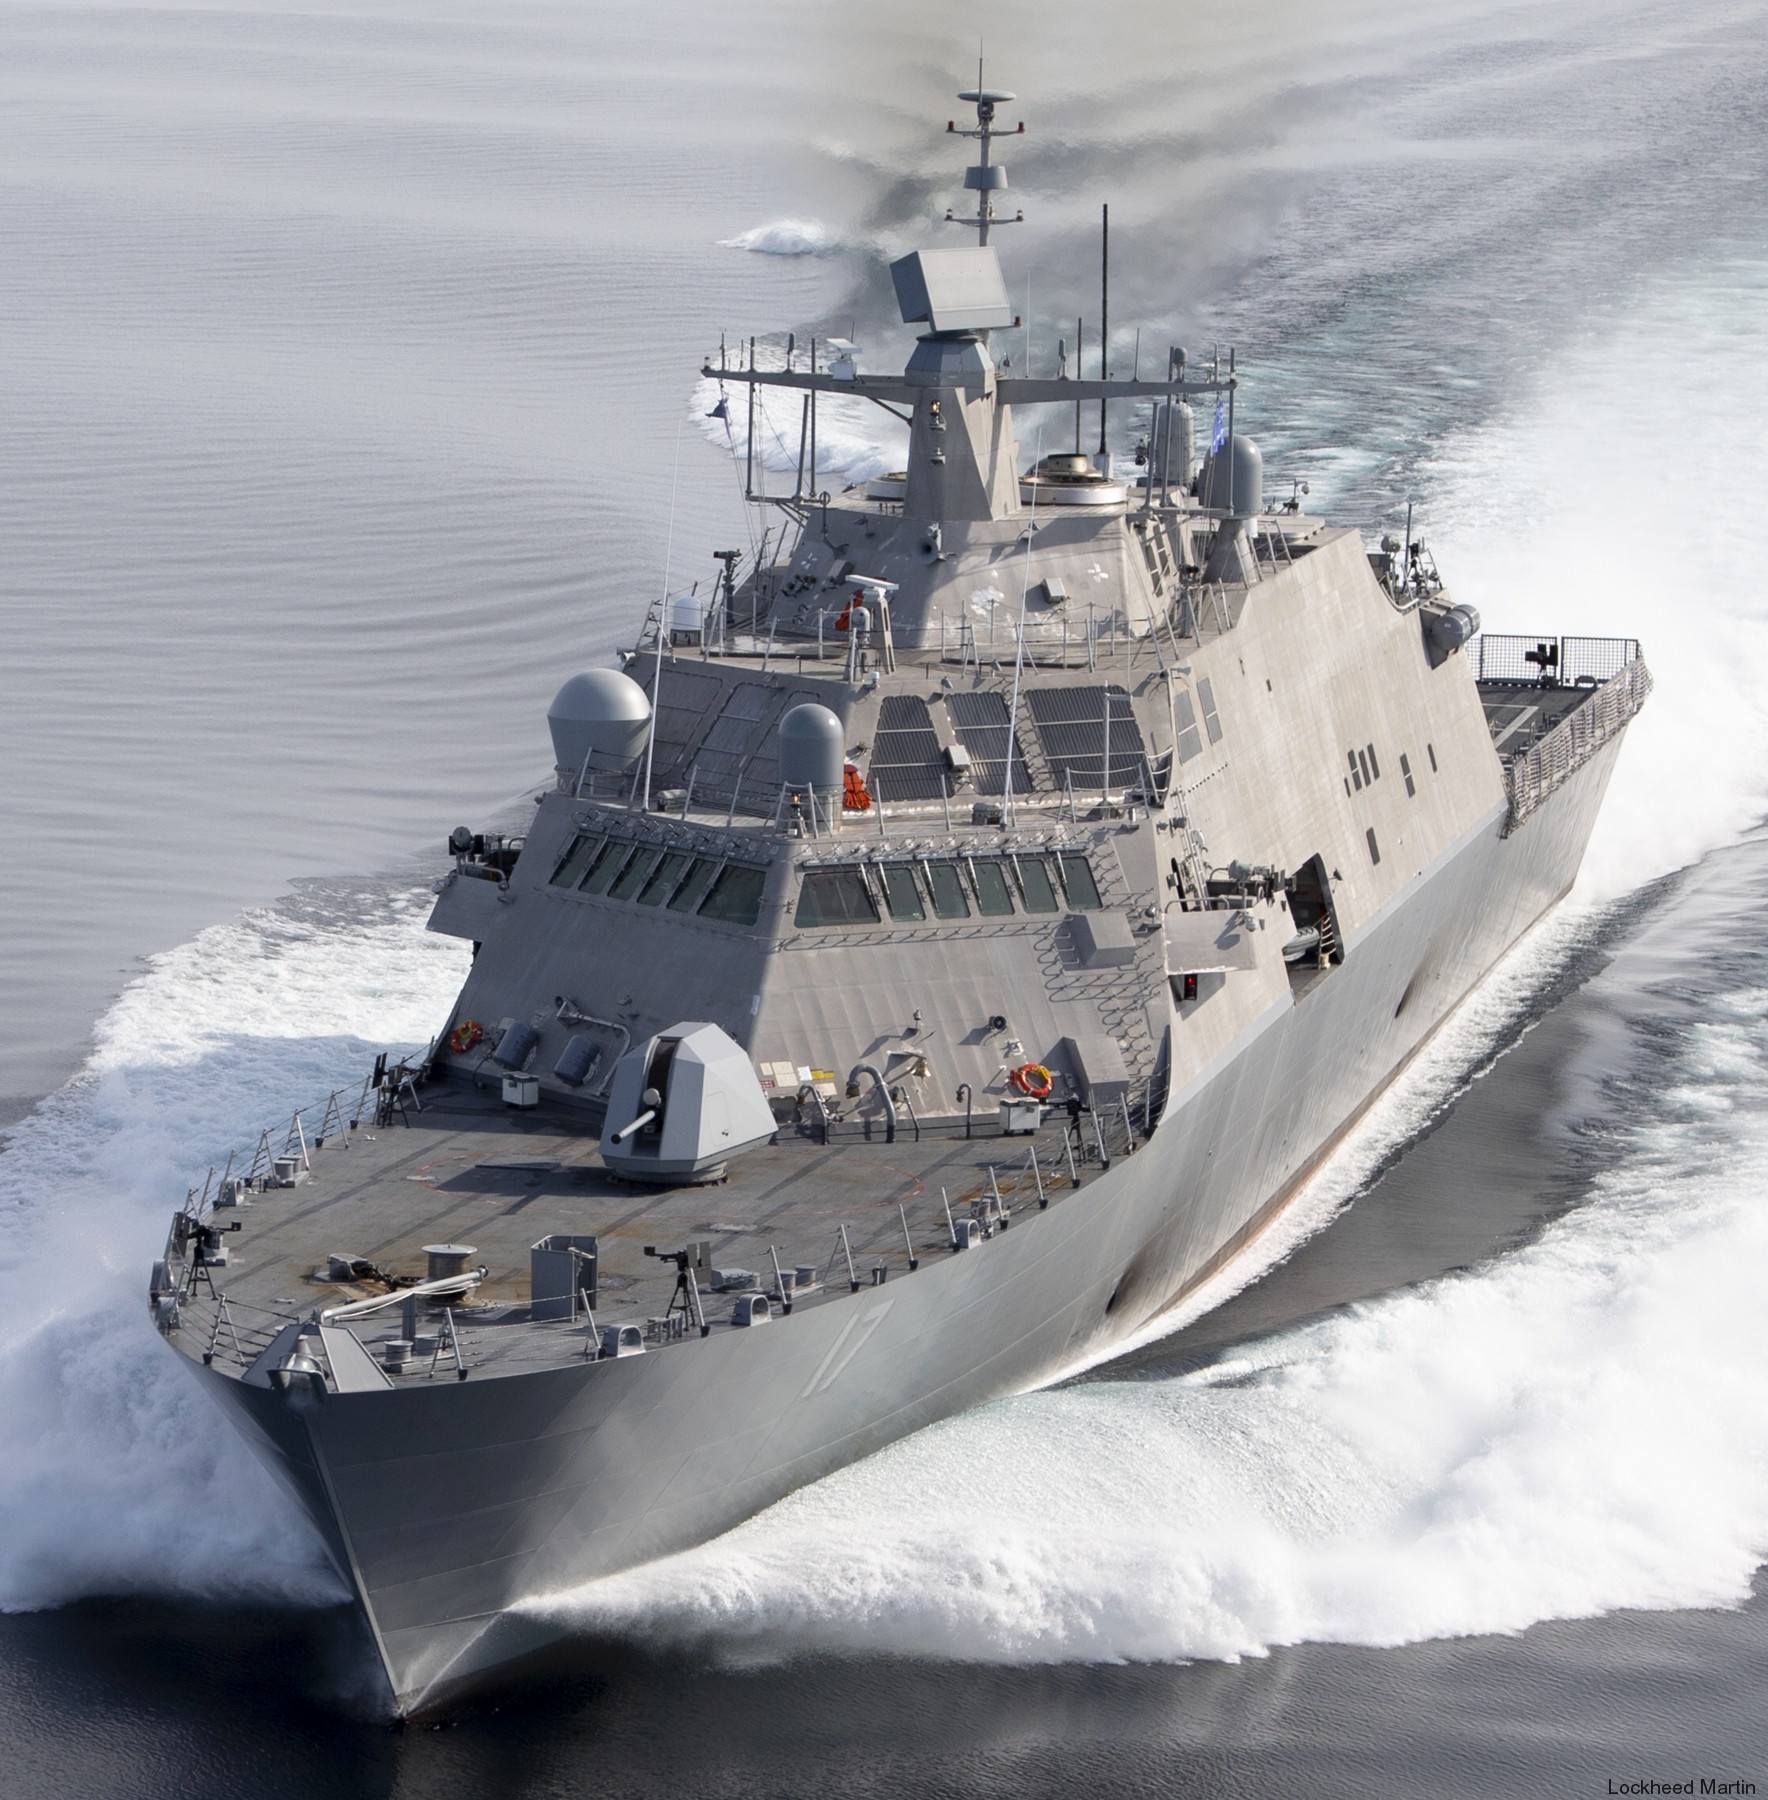 lcs-17 uss indianapolis freedom class littoral combat ship us navy 25